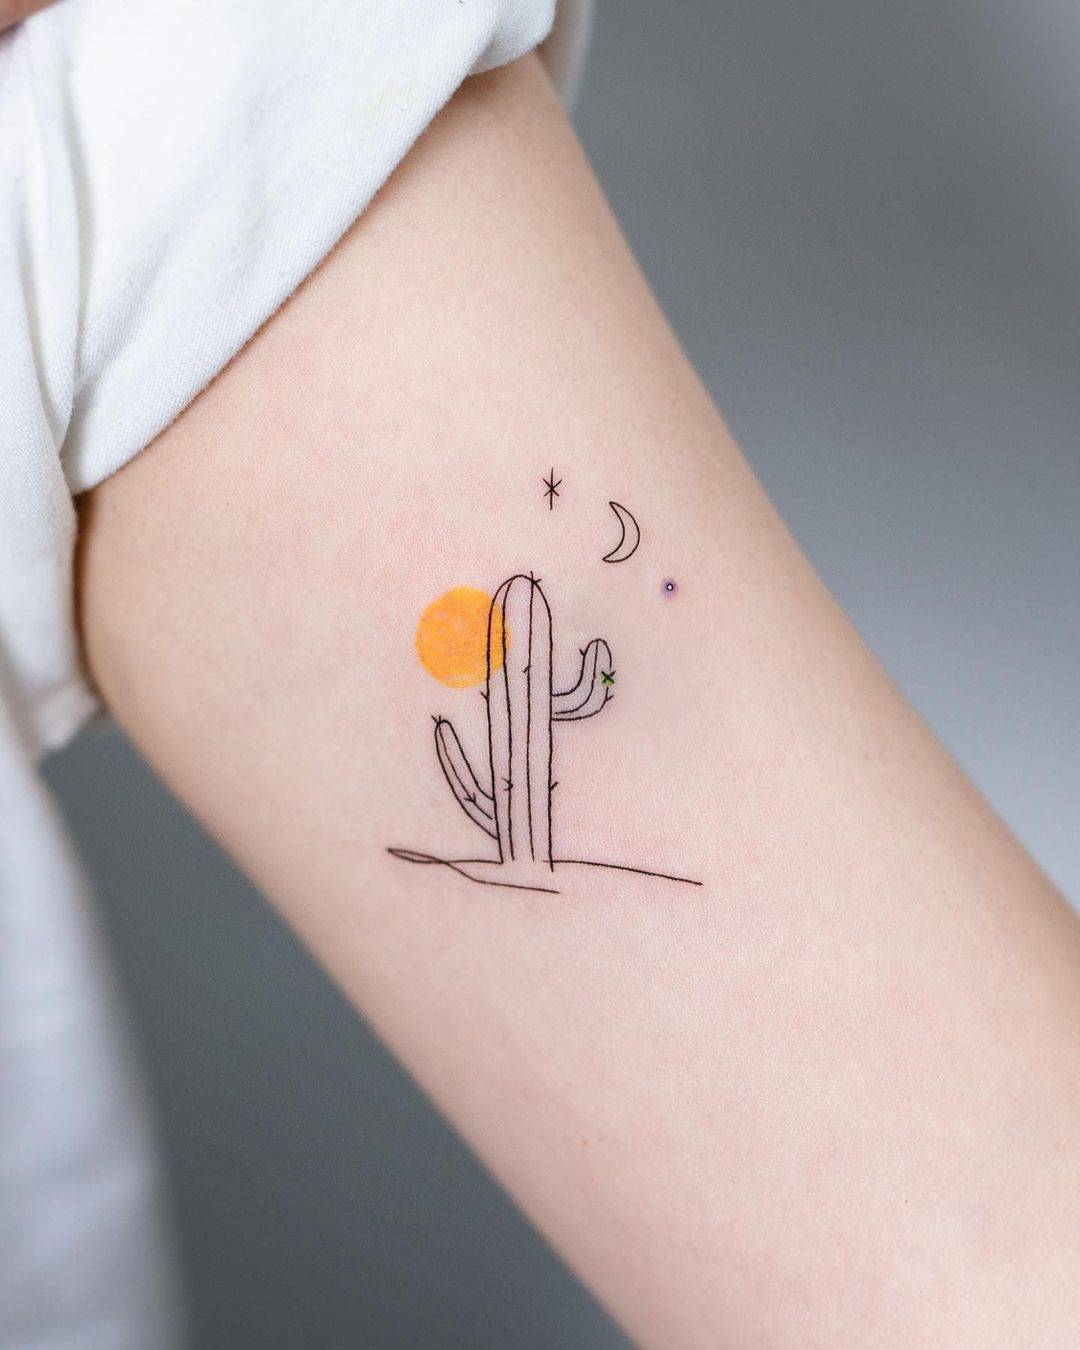 Amazon.com : Hoowu Temporary Tattoos Inspirational Words Tiny Branch Black  Flower Long Lasting Fake Tattoos Wild Flower Floral Plant Small Tattoo  Stickers for Women Girl Fave Hands Kids Body Art Arm :